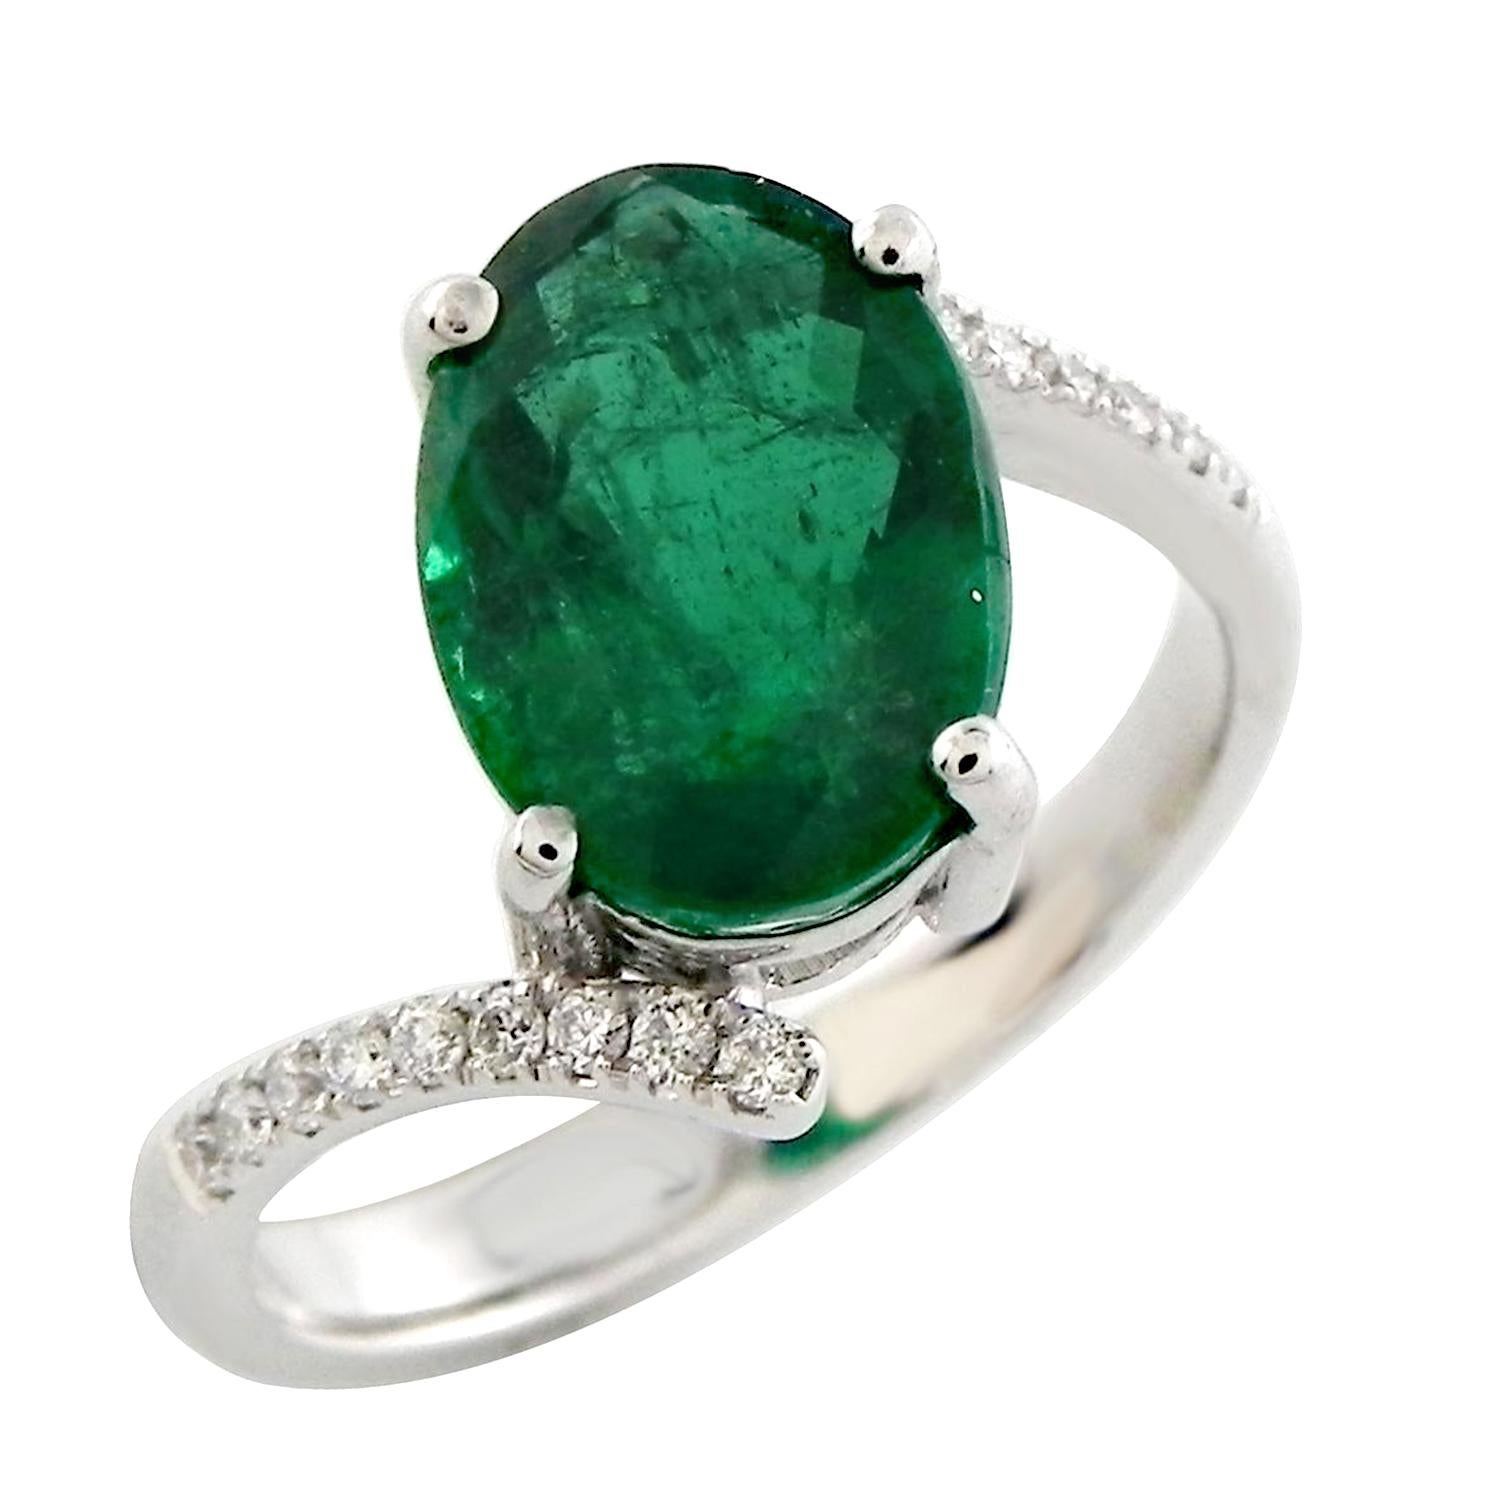 Mixed Cut Oval Shaped Emerald Ring With Diamonds Made In 18k Gold For Sale